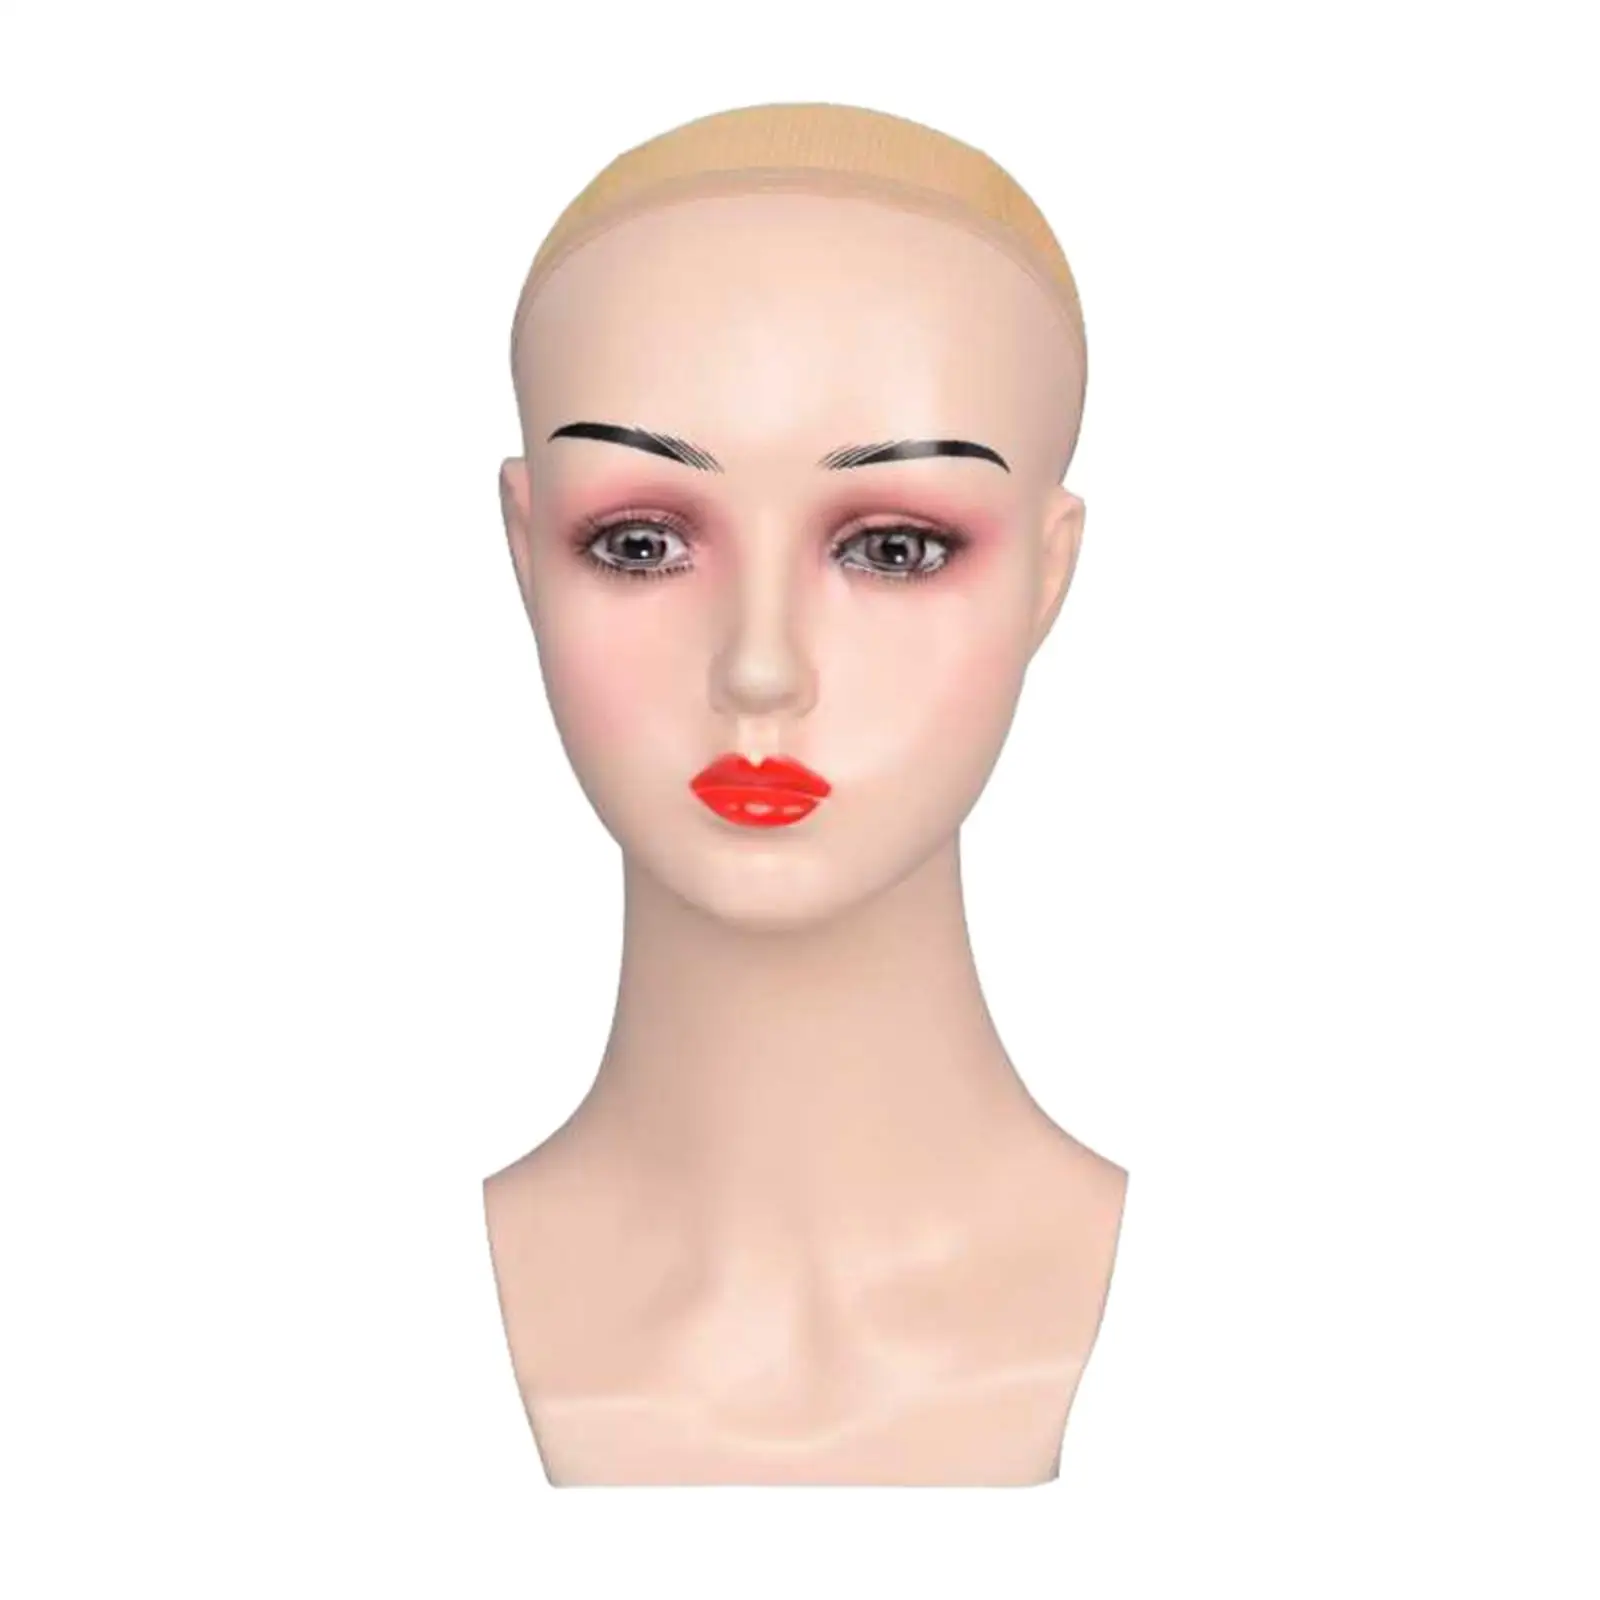 Female Bald Mannequin Head Hat Display Rack Stable Base Smooth Durable Manikin for Hats Wigs Making Hairpieces Necklace Jewelry